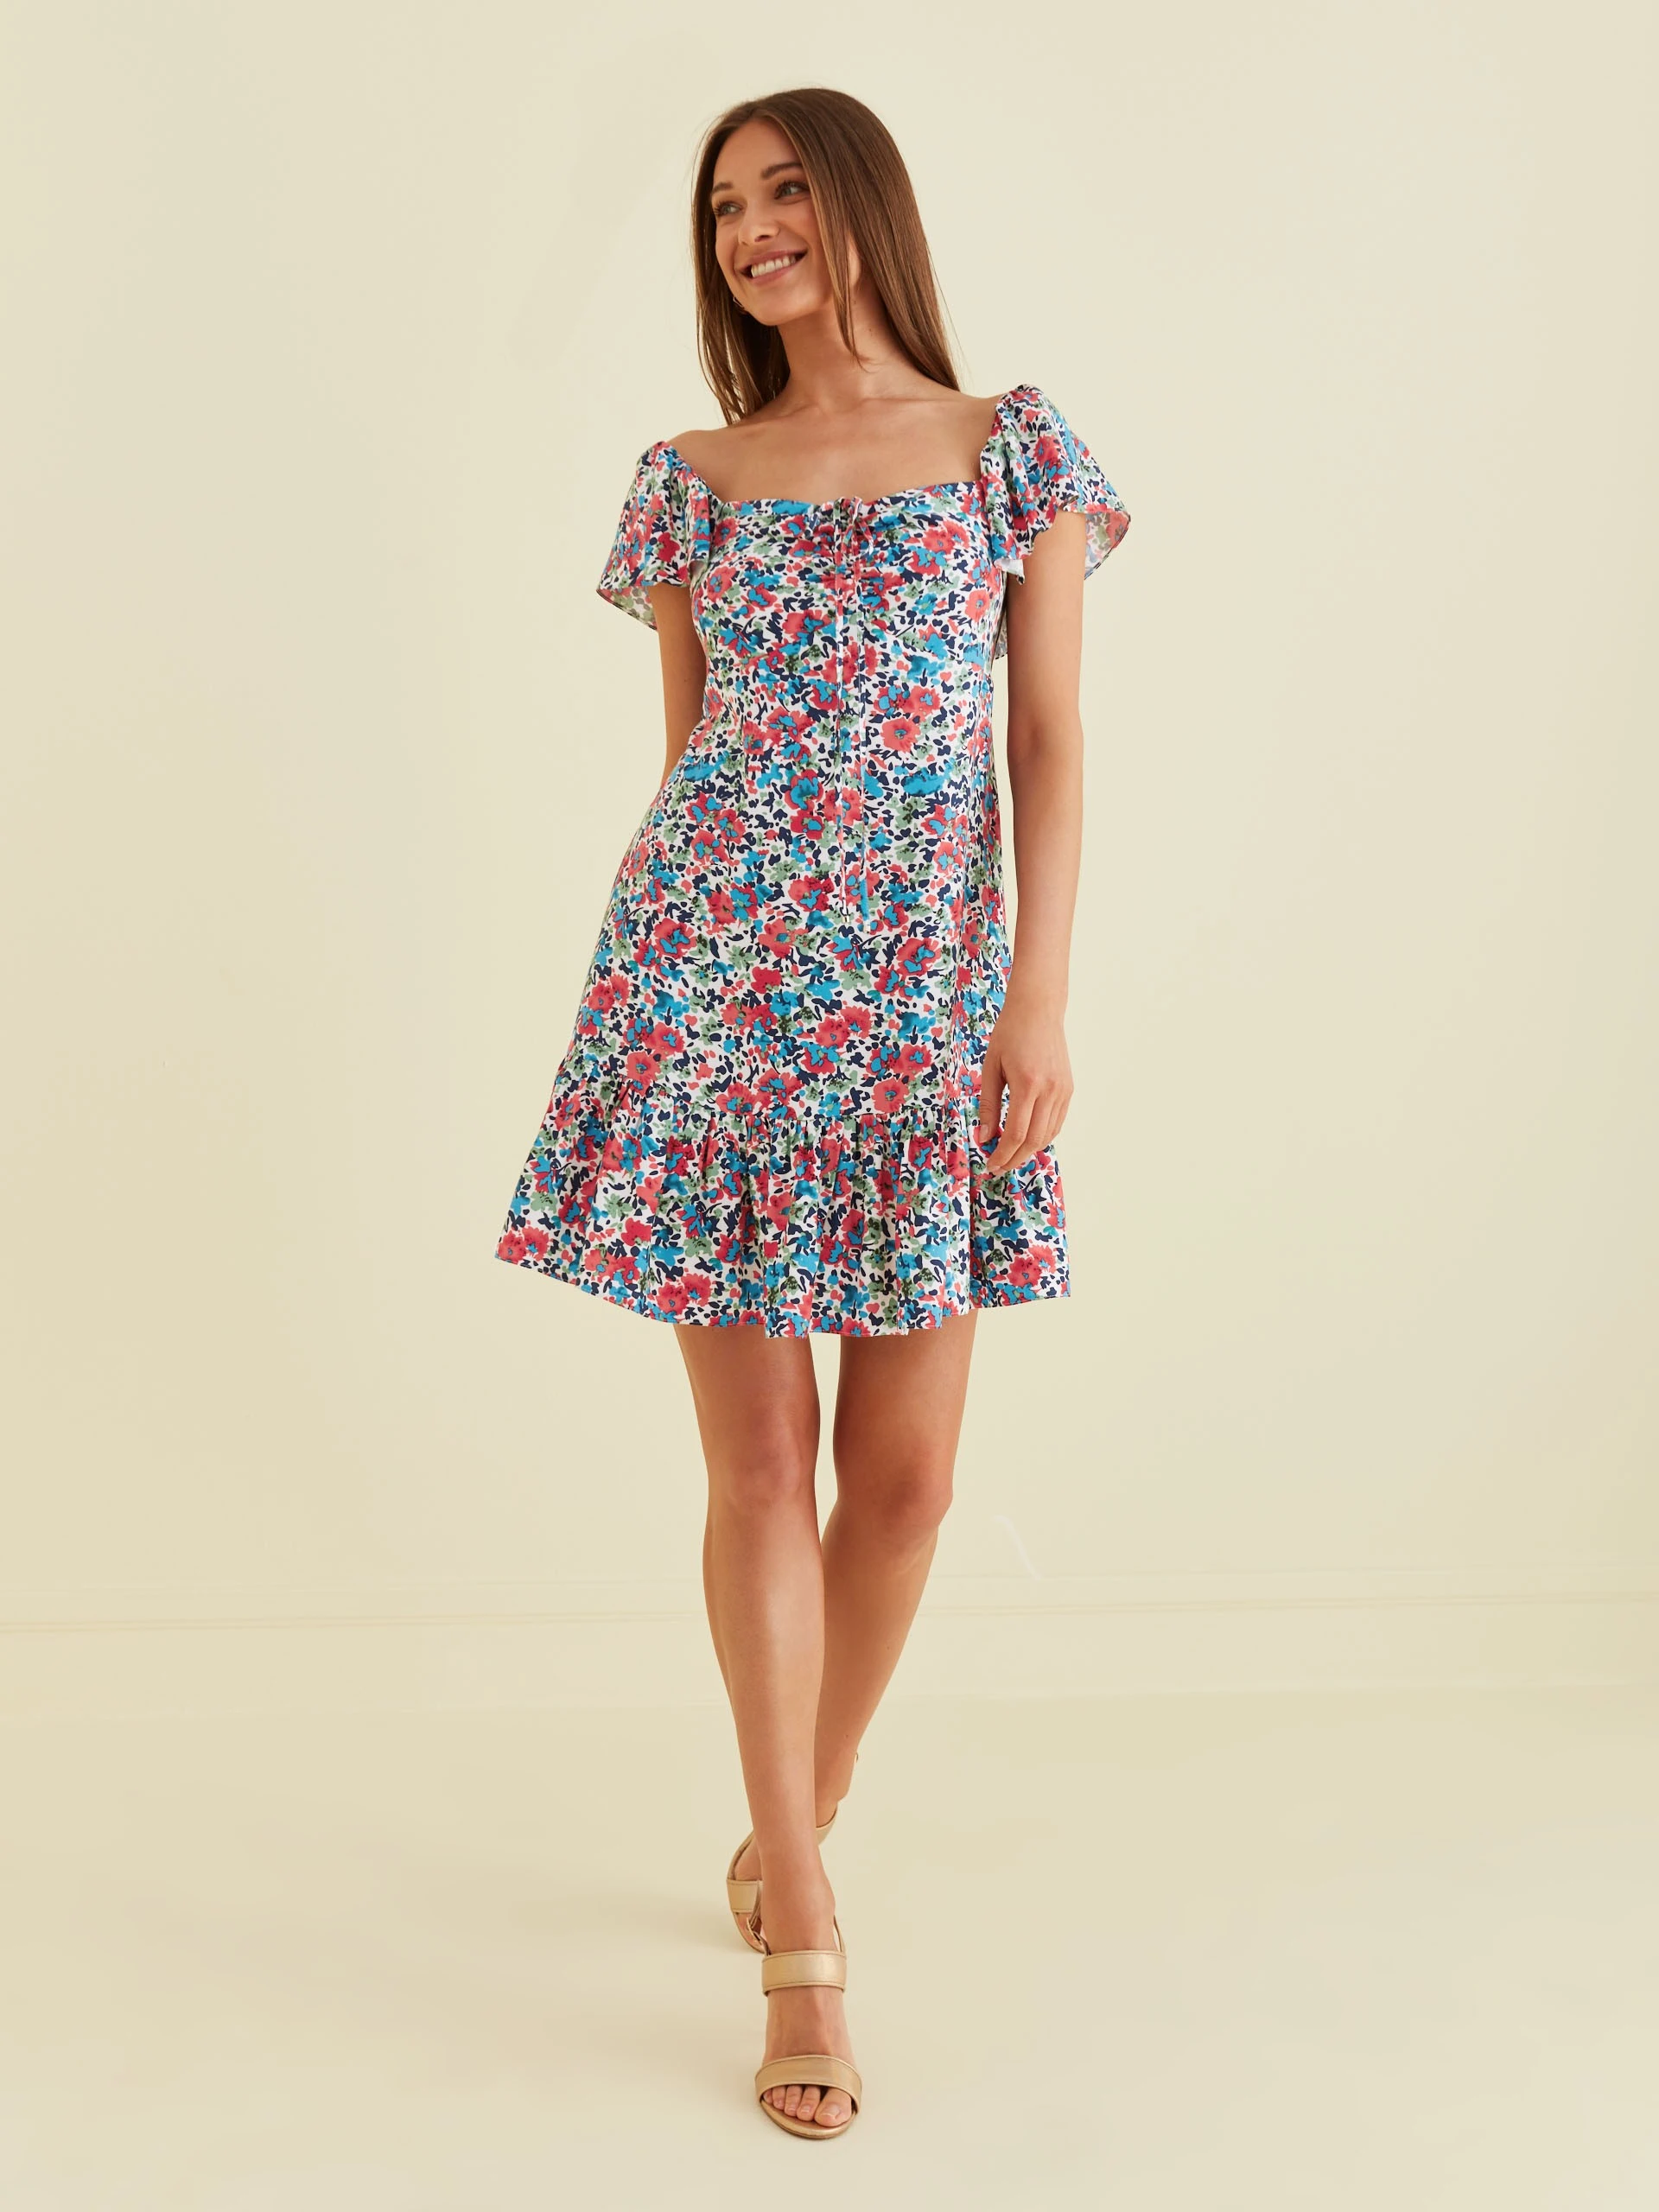 FLORAL MINI DRESS WITH FRILL